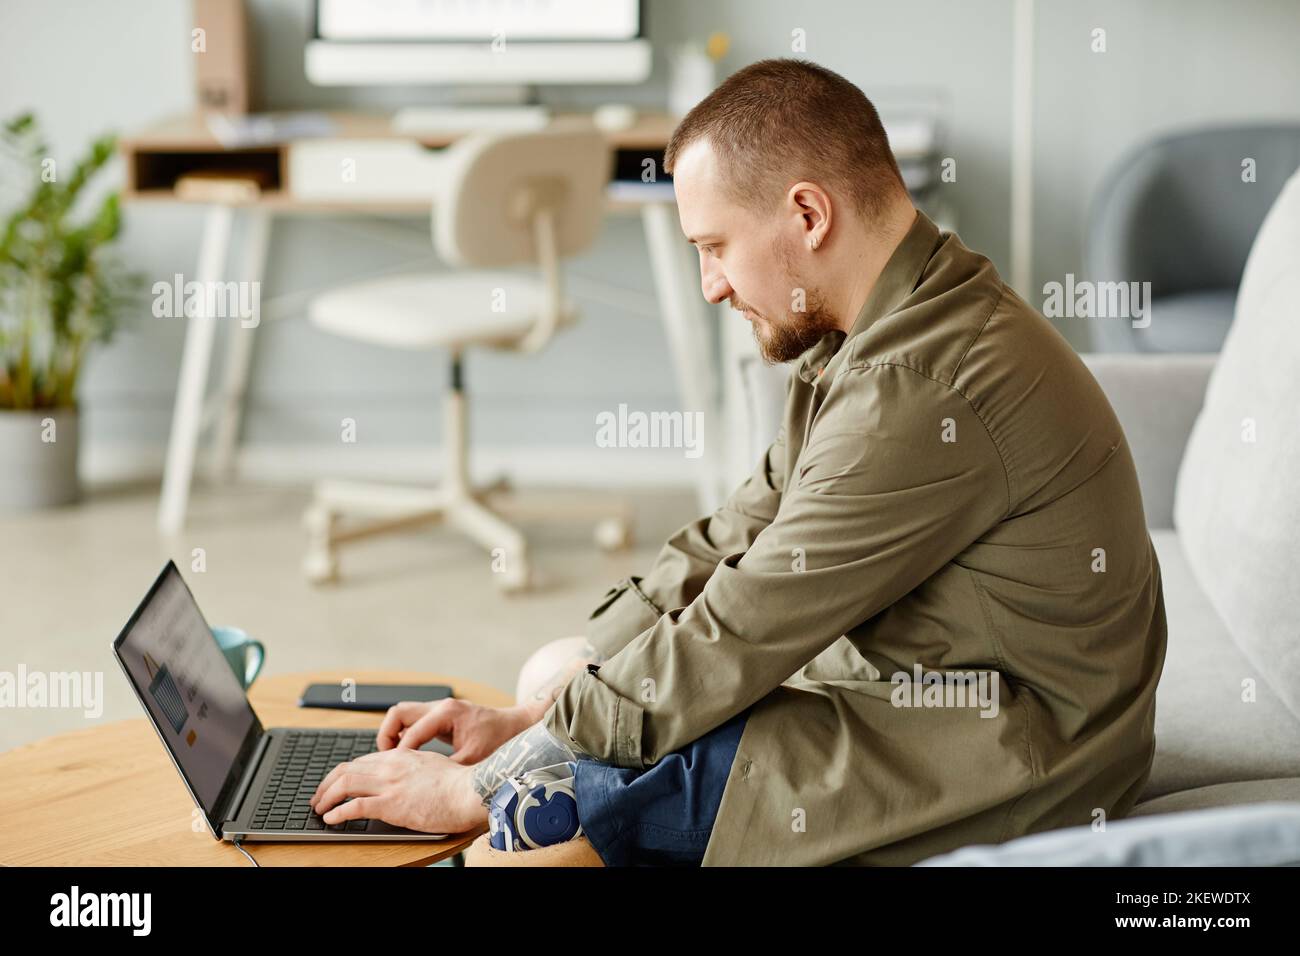 Side view portrait of man with prosthetic leg using laptop while working from home, copy space Stock Photo